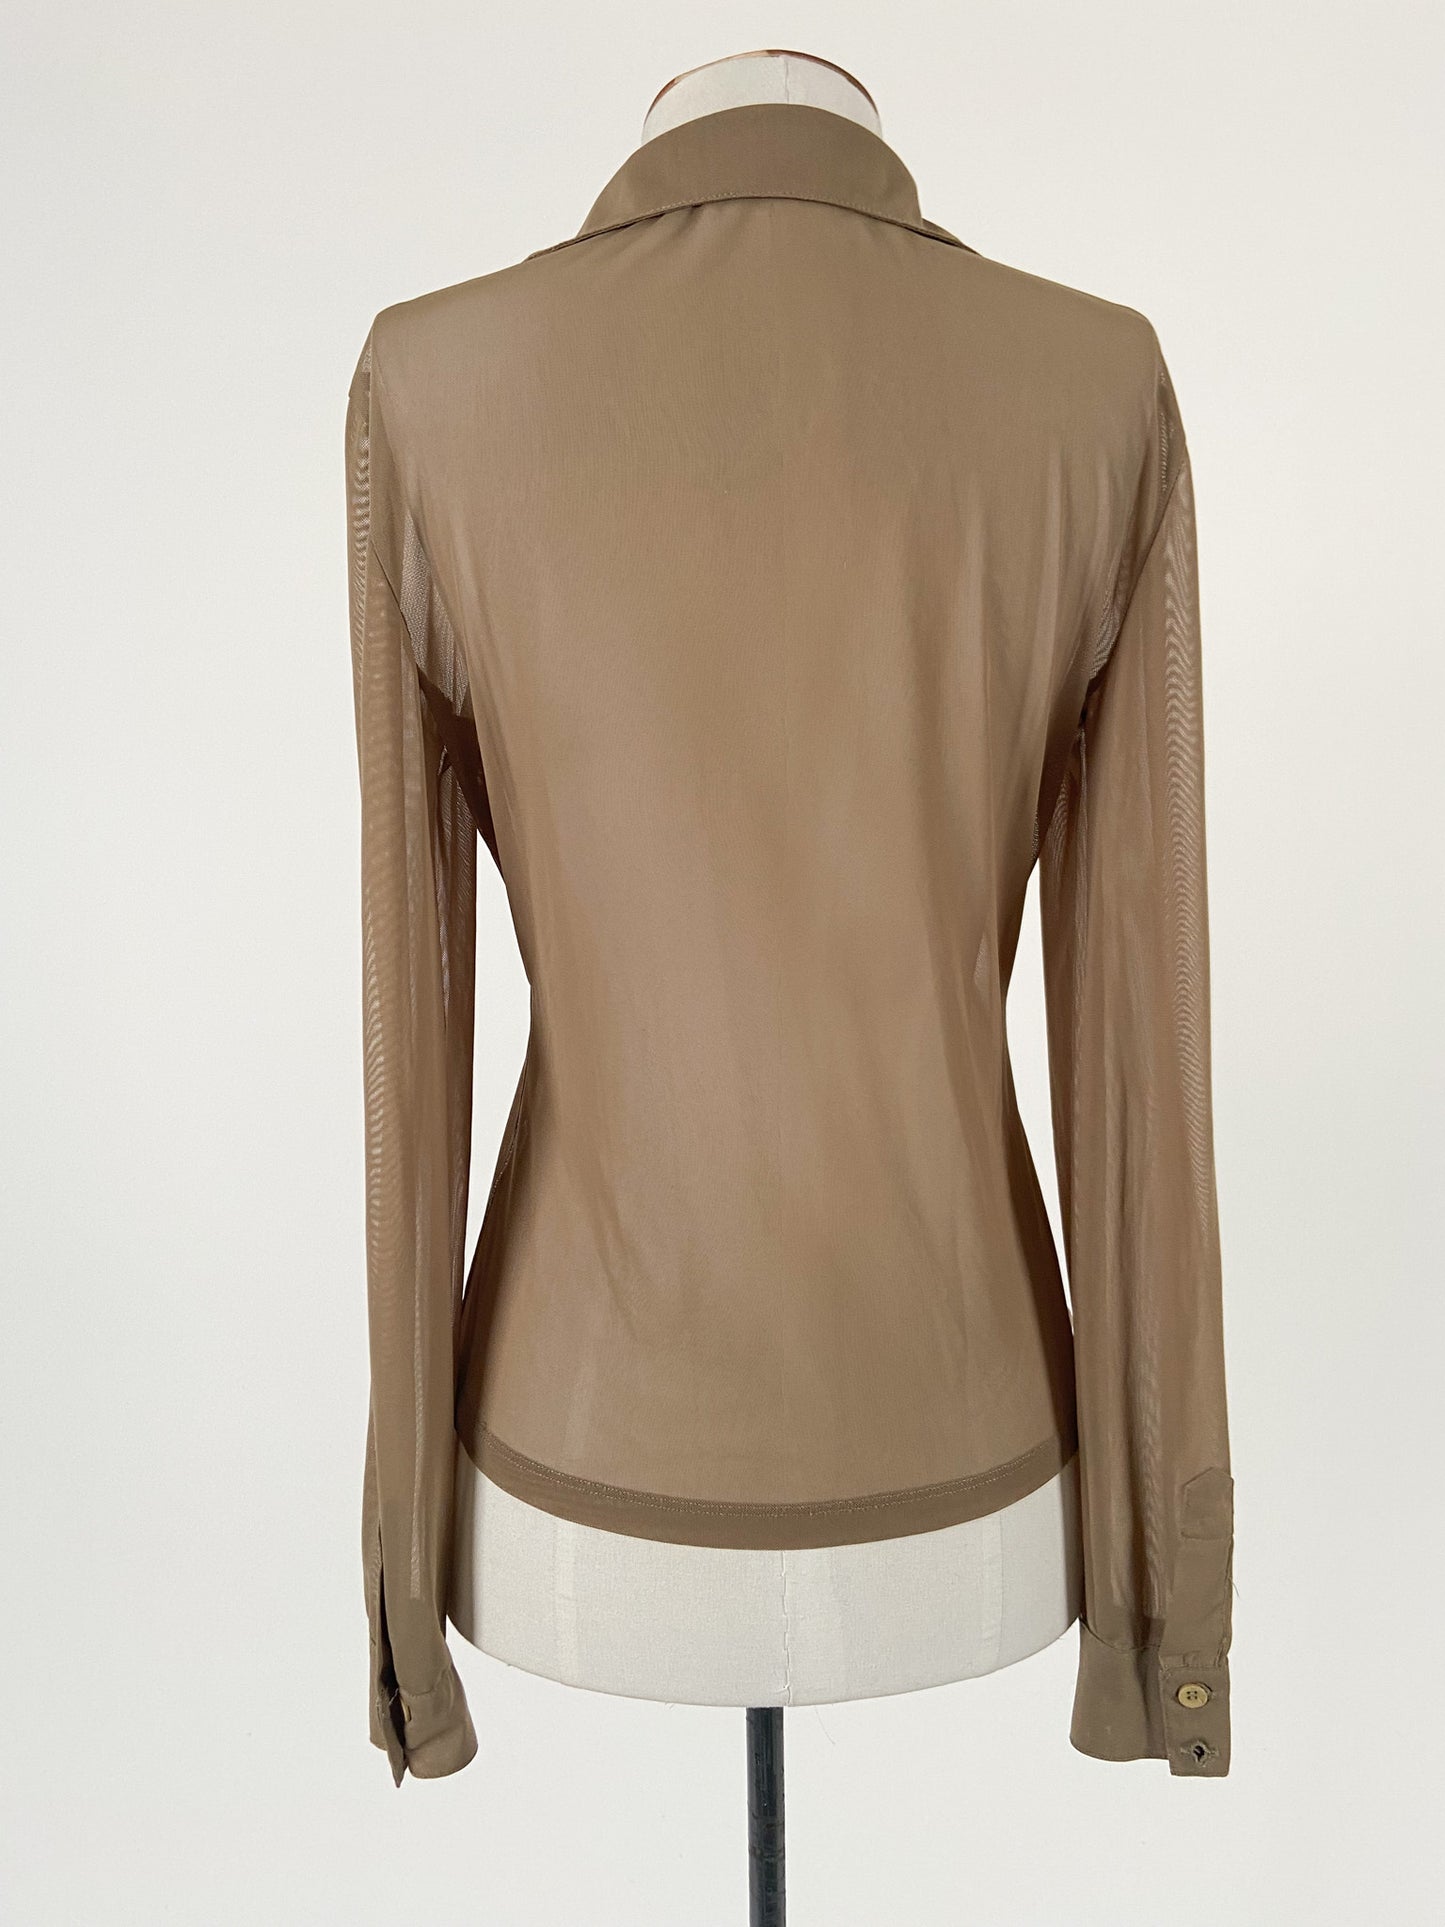 NA-KD | Brown Casual/Cocktail Top | Size S